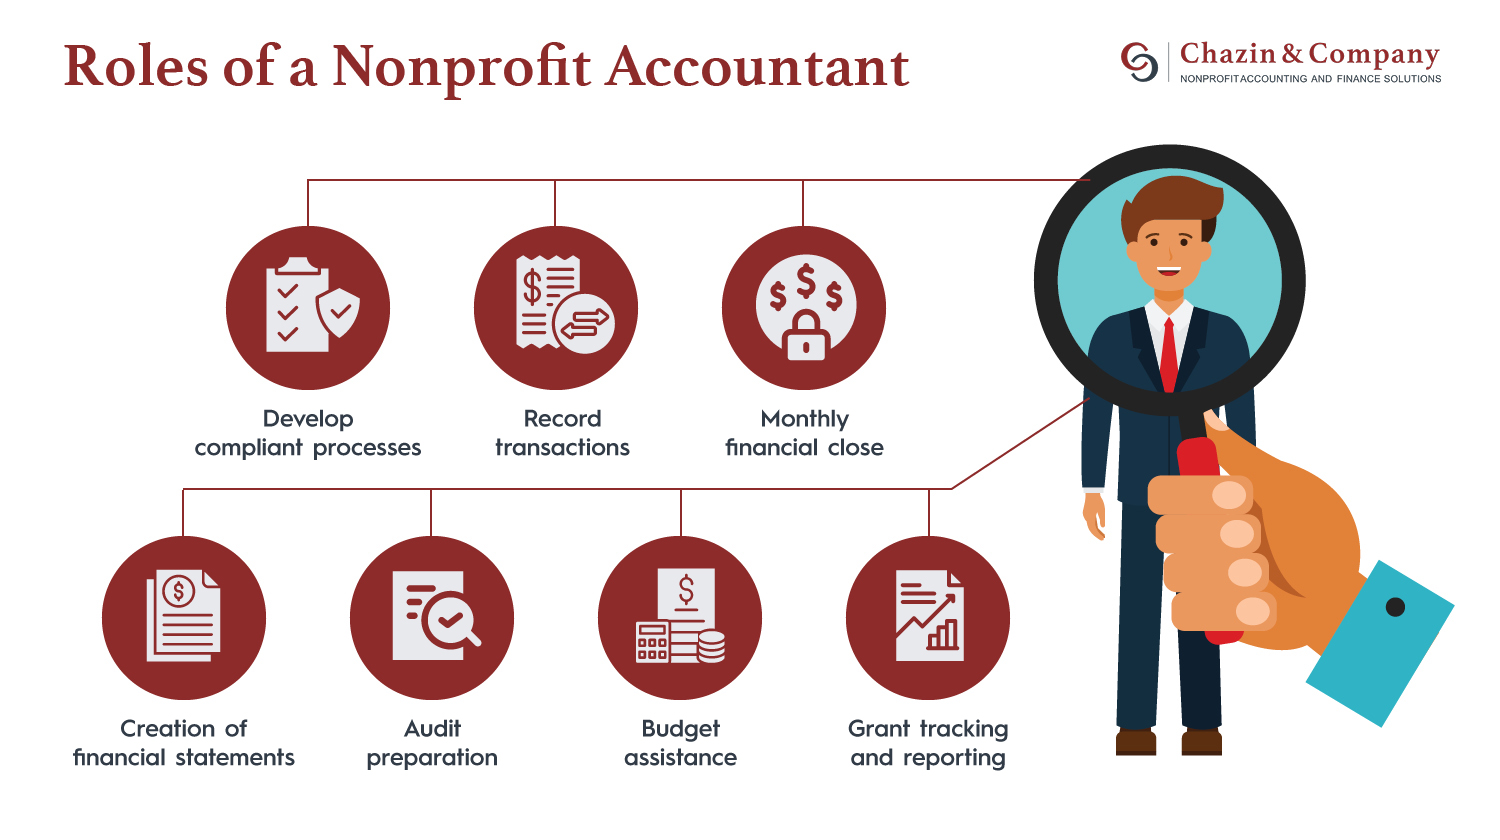 The roles of a nonprofit accountant, who can help manage an advocacy group’s finances.